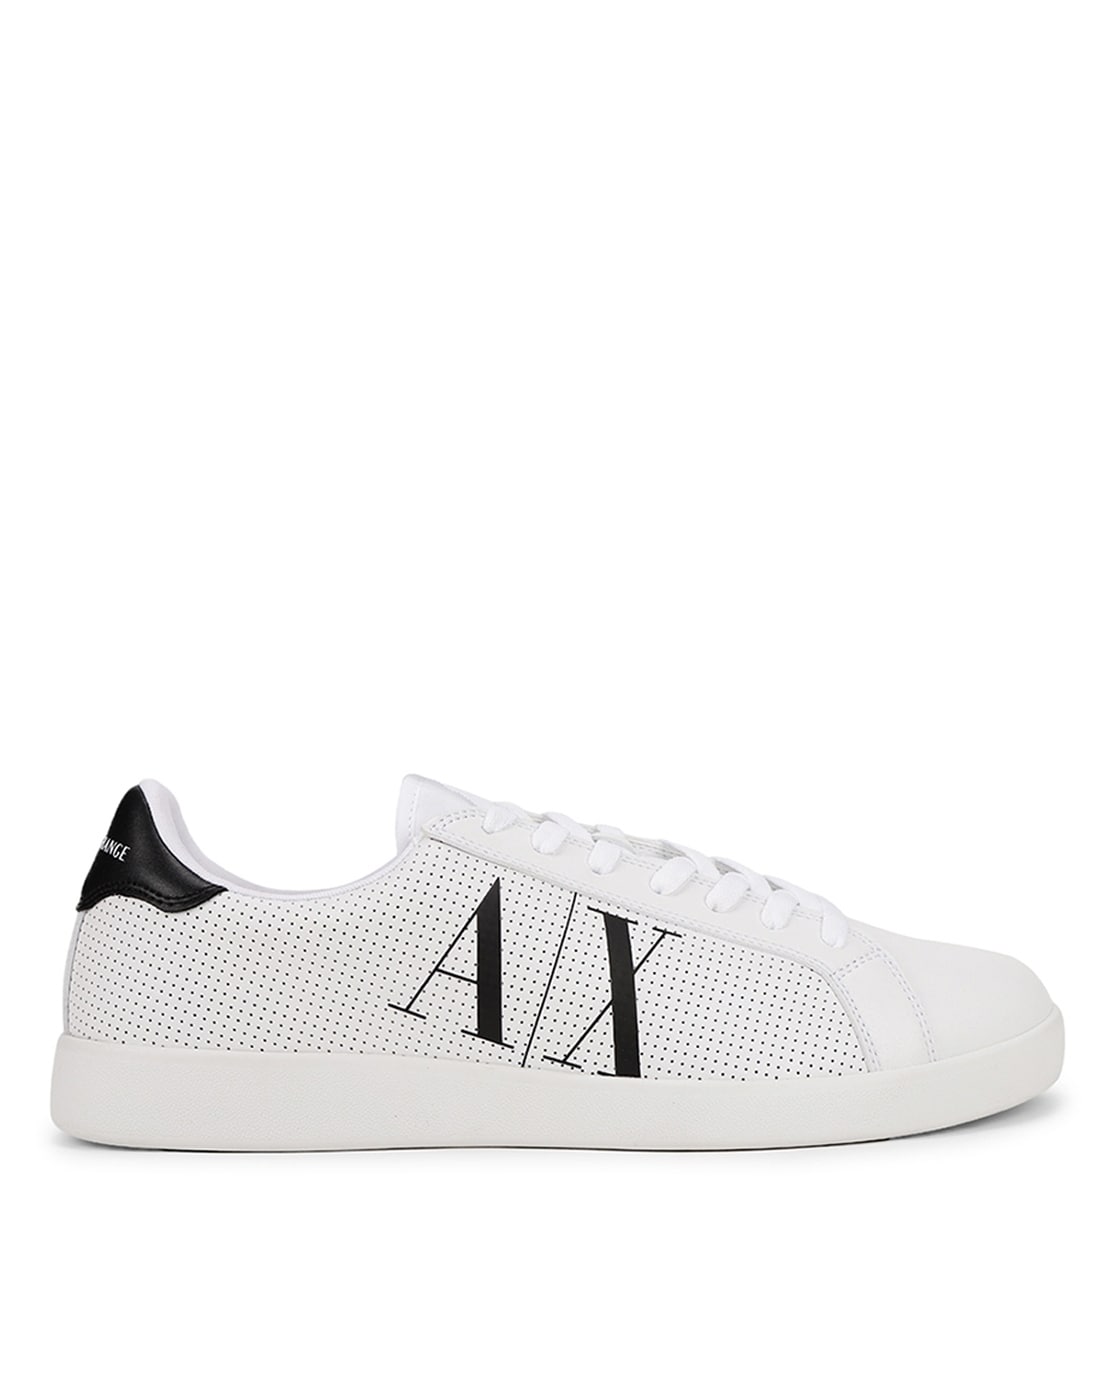 Embroidered logo sneakers | ARMANI EXCHANGE Woman